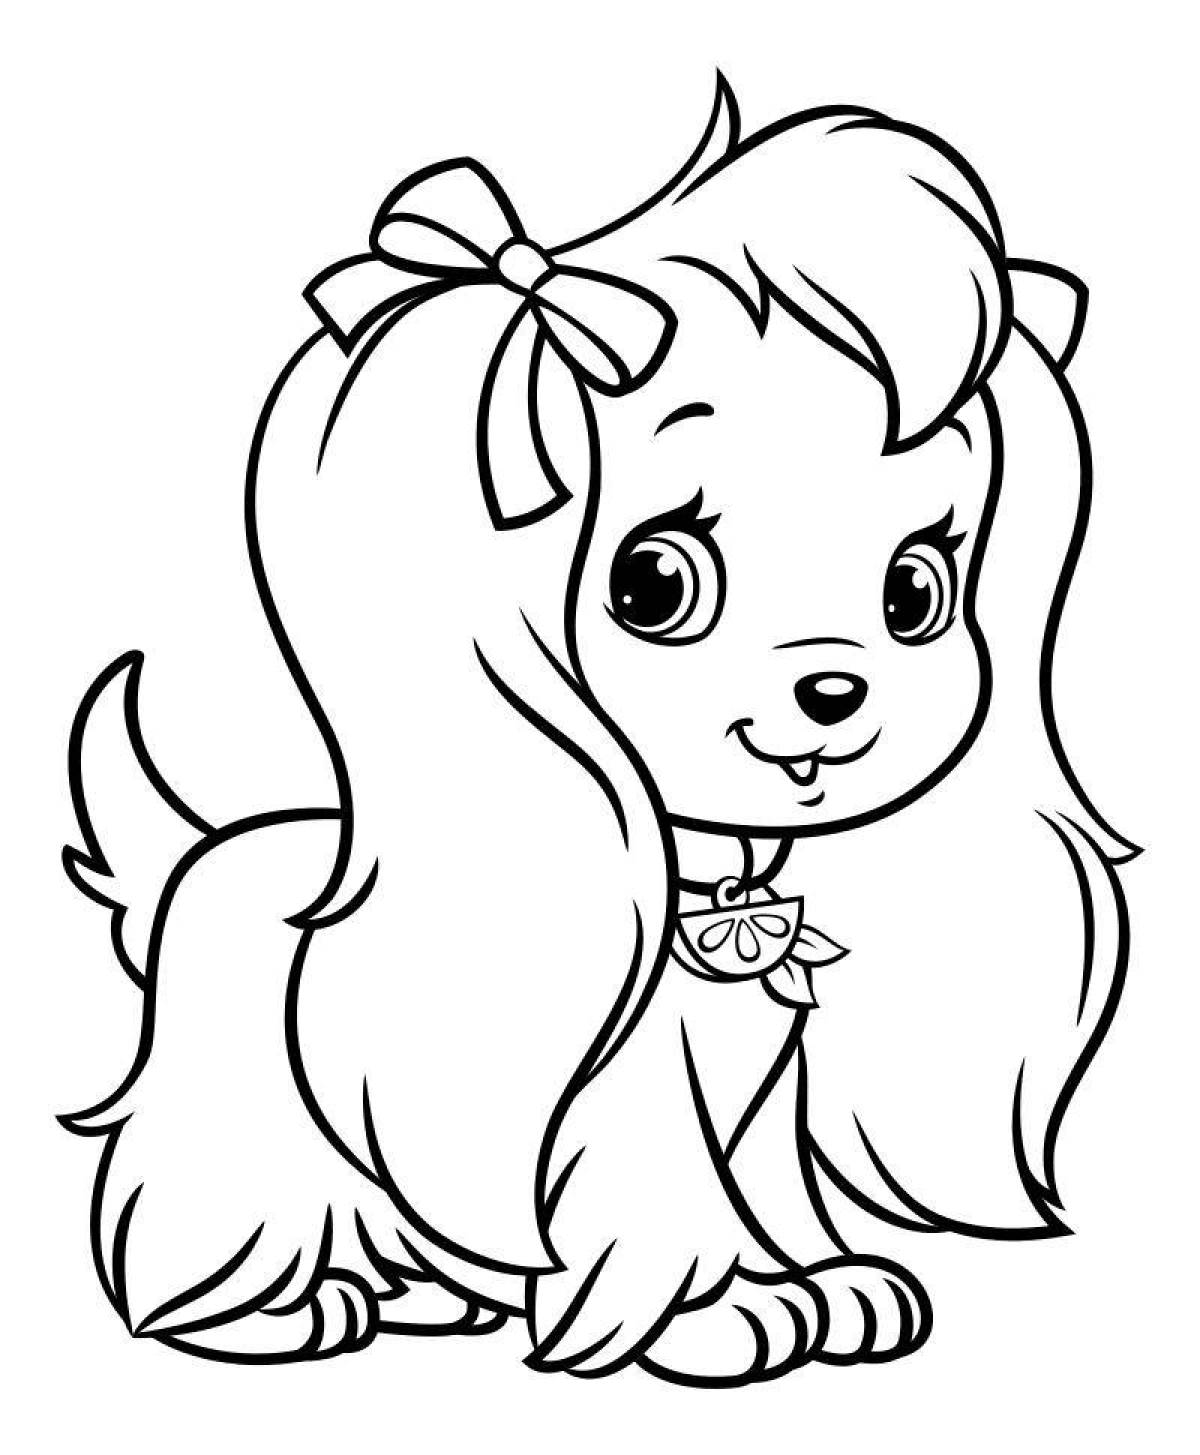 Coloring page cute and fluffy dog